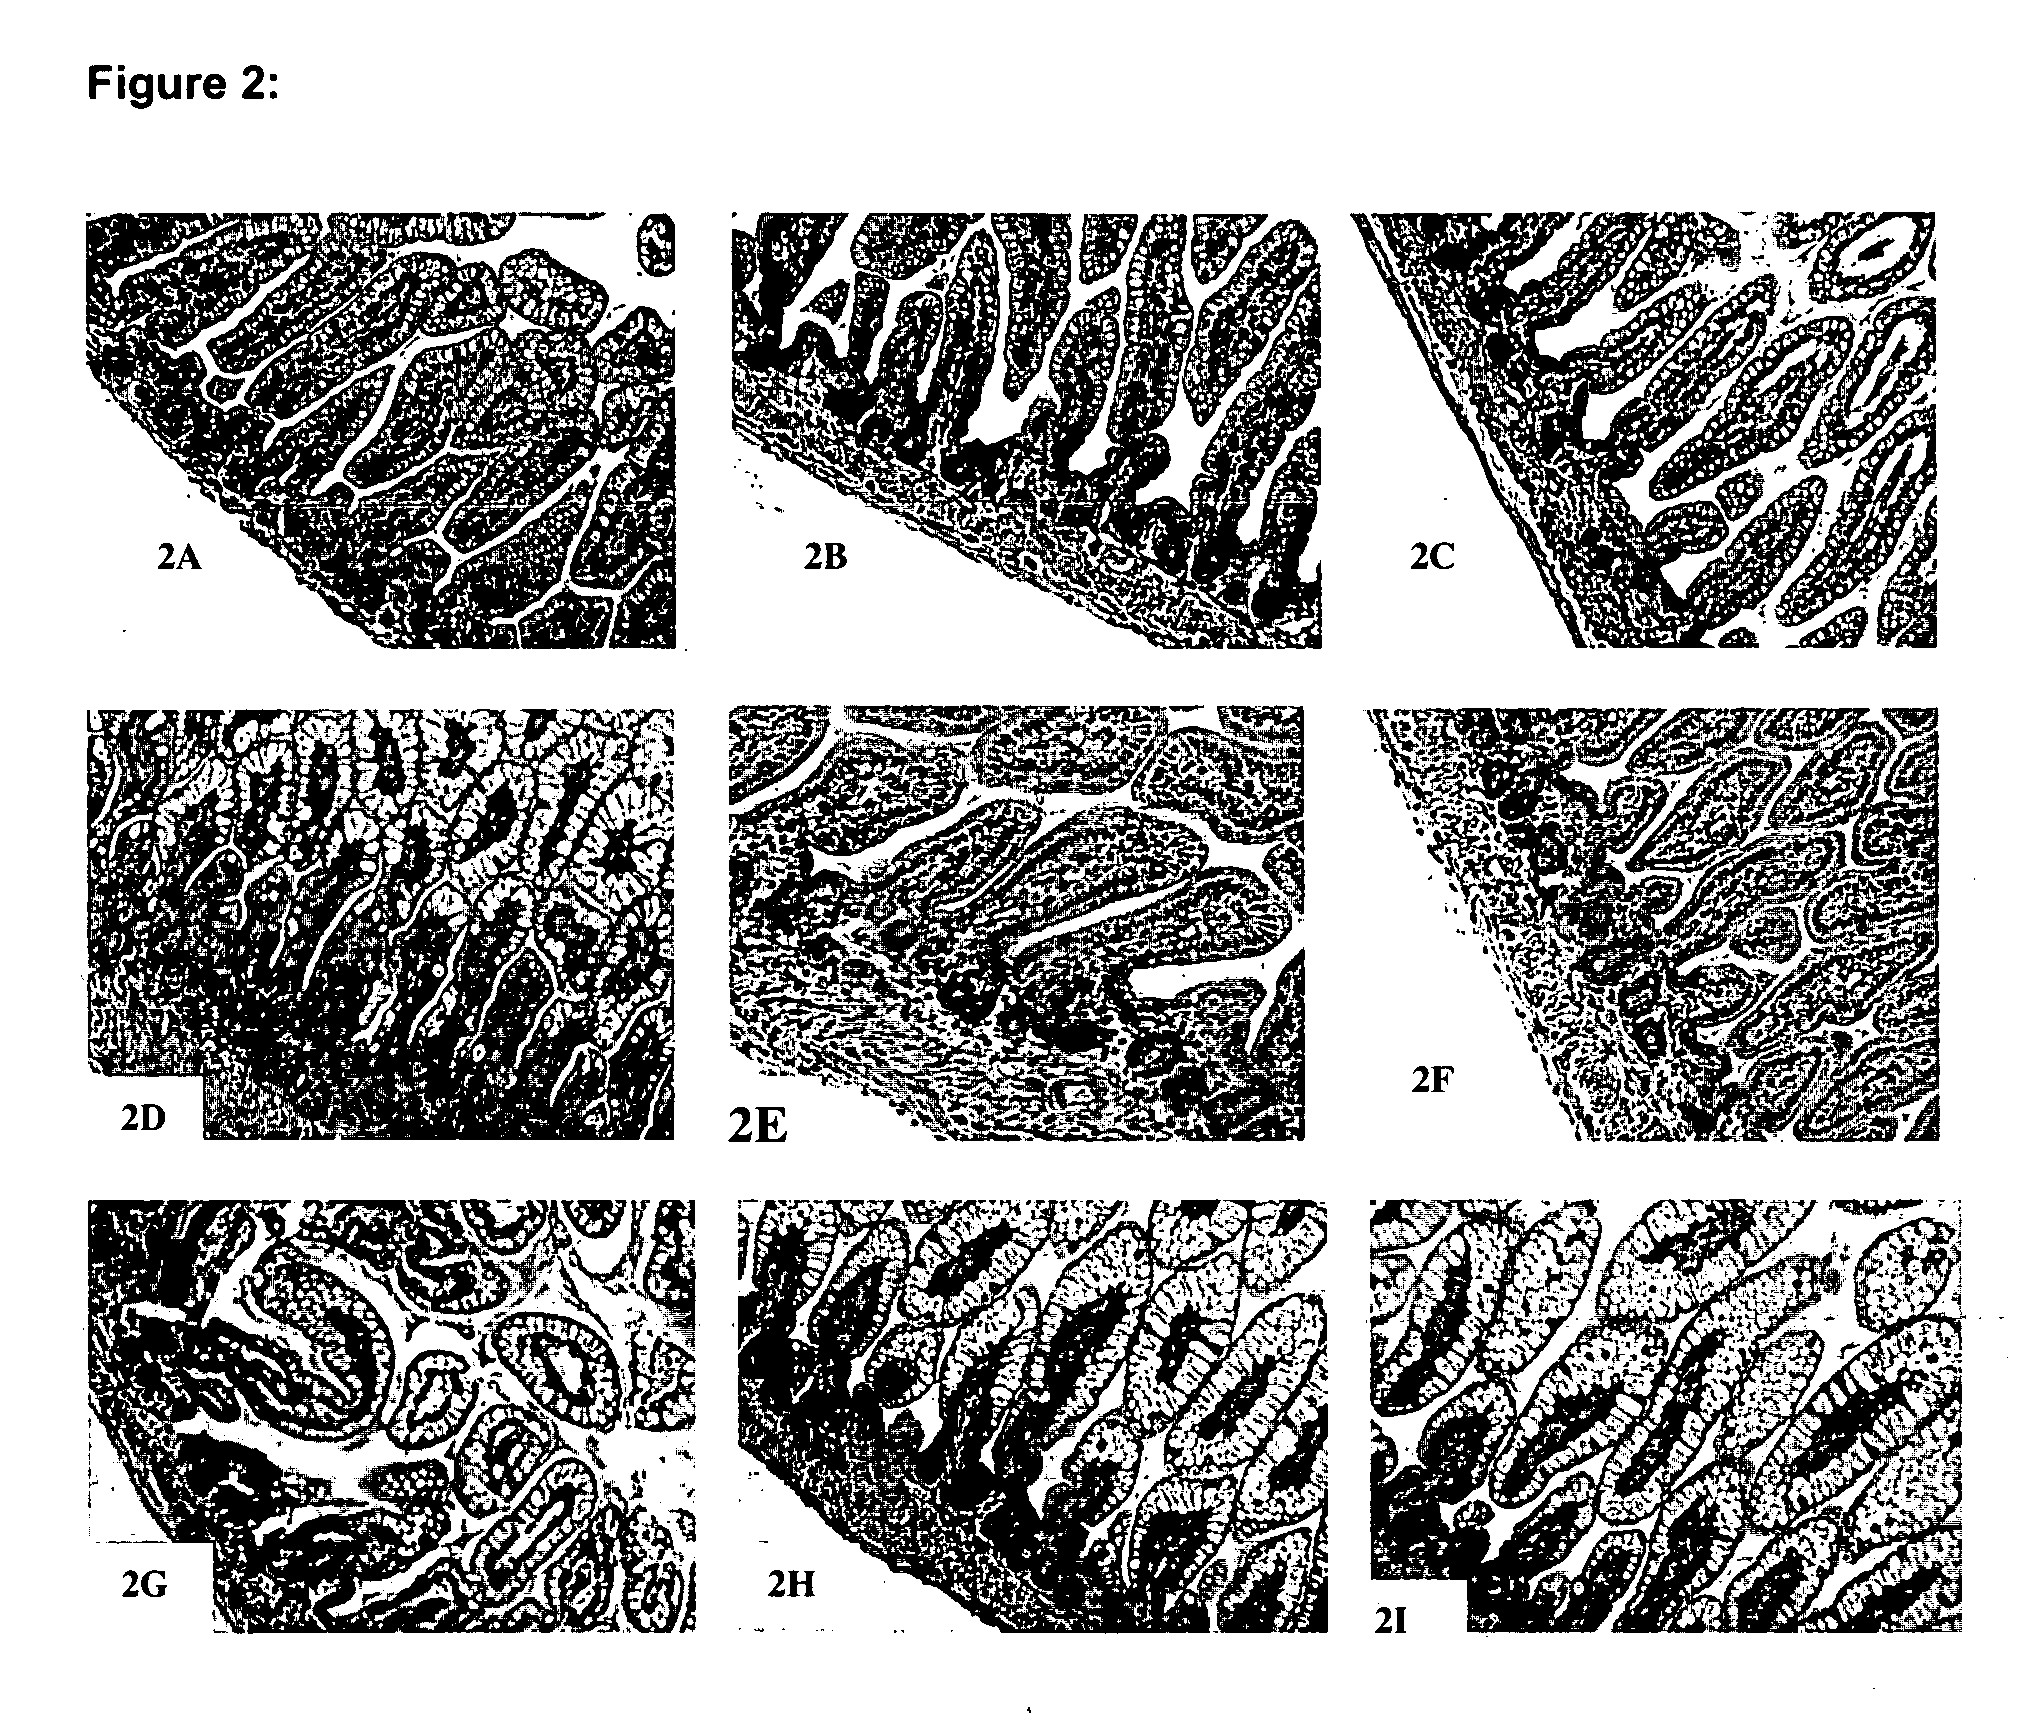 Method for treating or preventing systemic inflammation in formula-fed infants